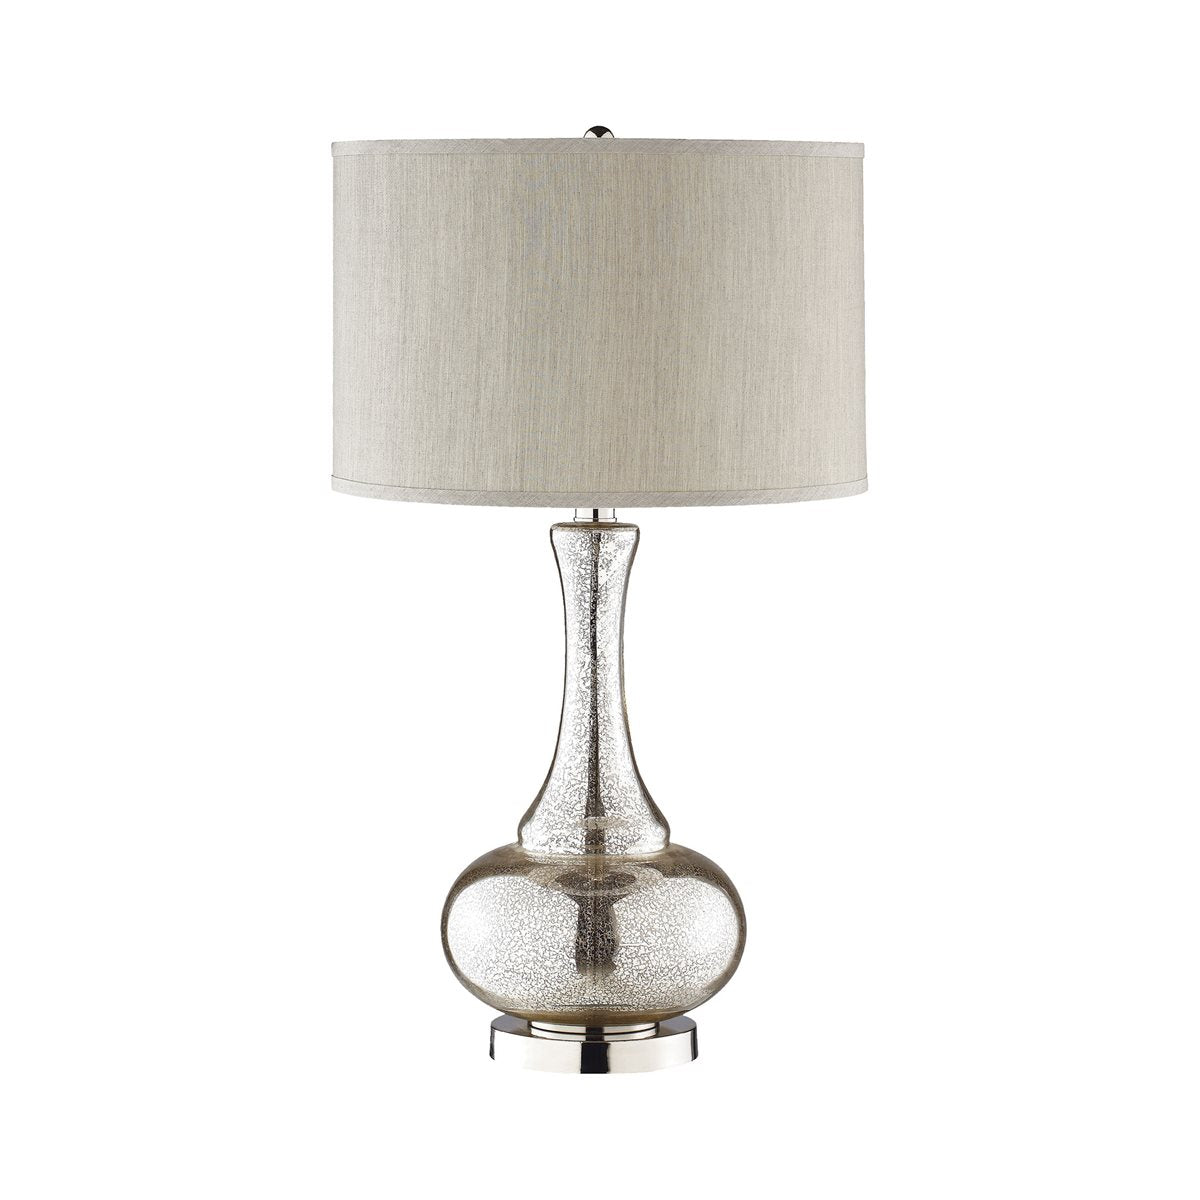 Stein World Linore Table Lamp 98876